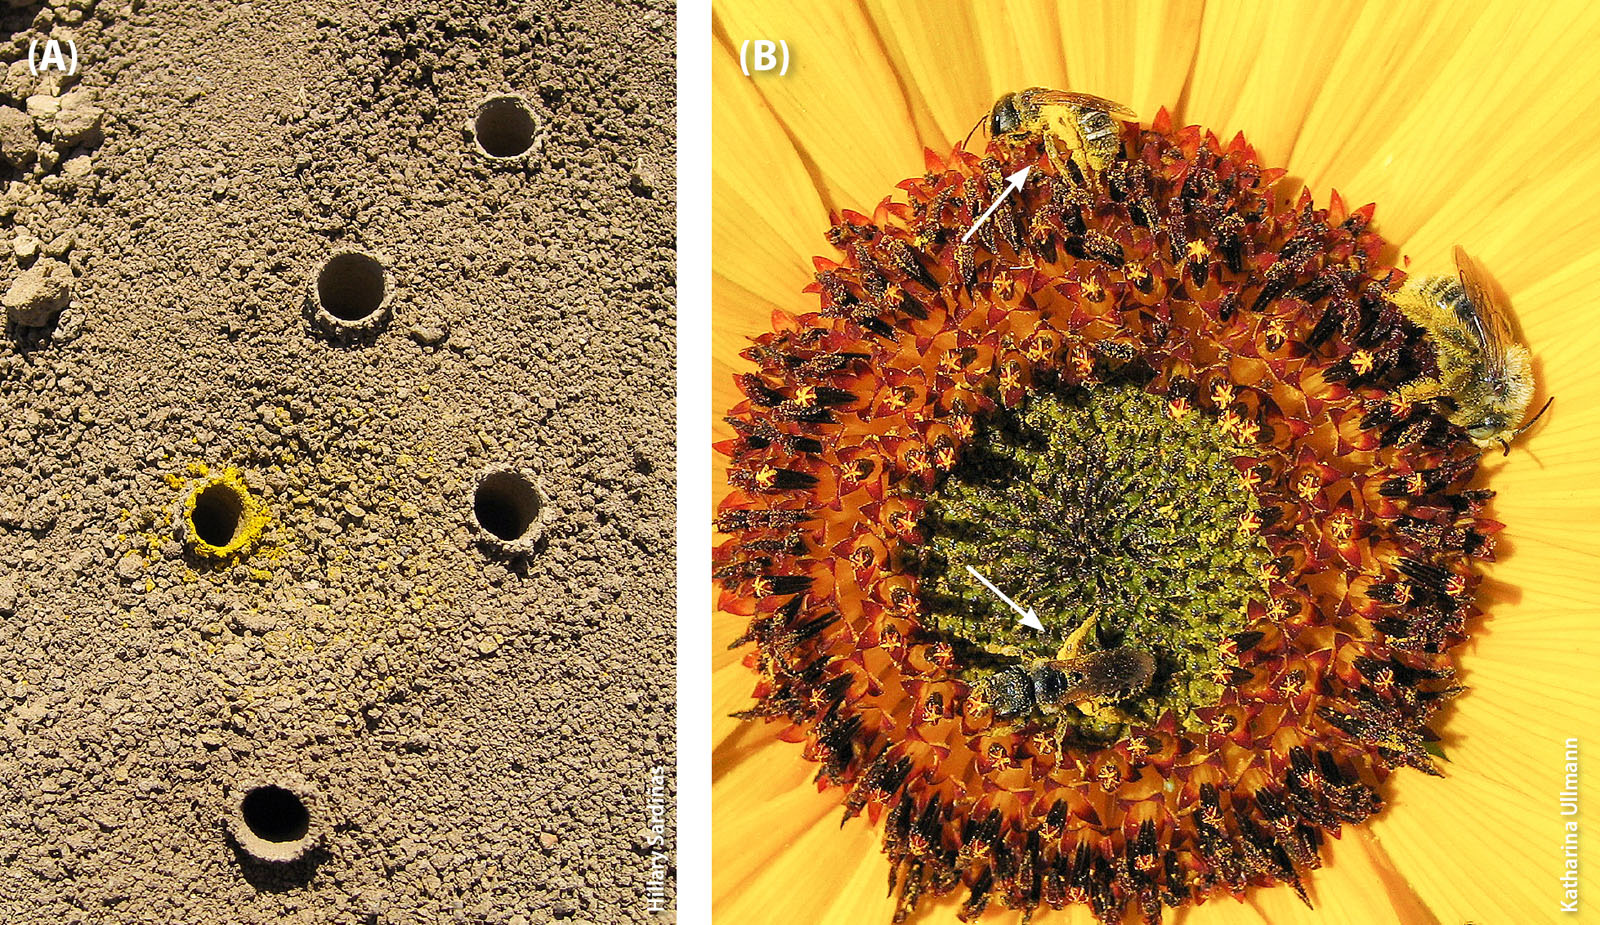 Nest entrances of the ground-nesting sunflower specialist bee, Diadasia enavata (A). Sunflower is visited by both specialist and generalist pollinators, including the generalist Halictus ligatus (B, arrows) and the specialist Diadasia enavata (B).